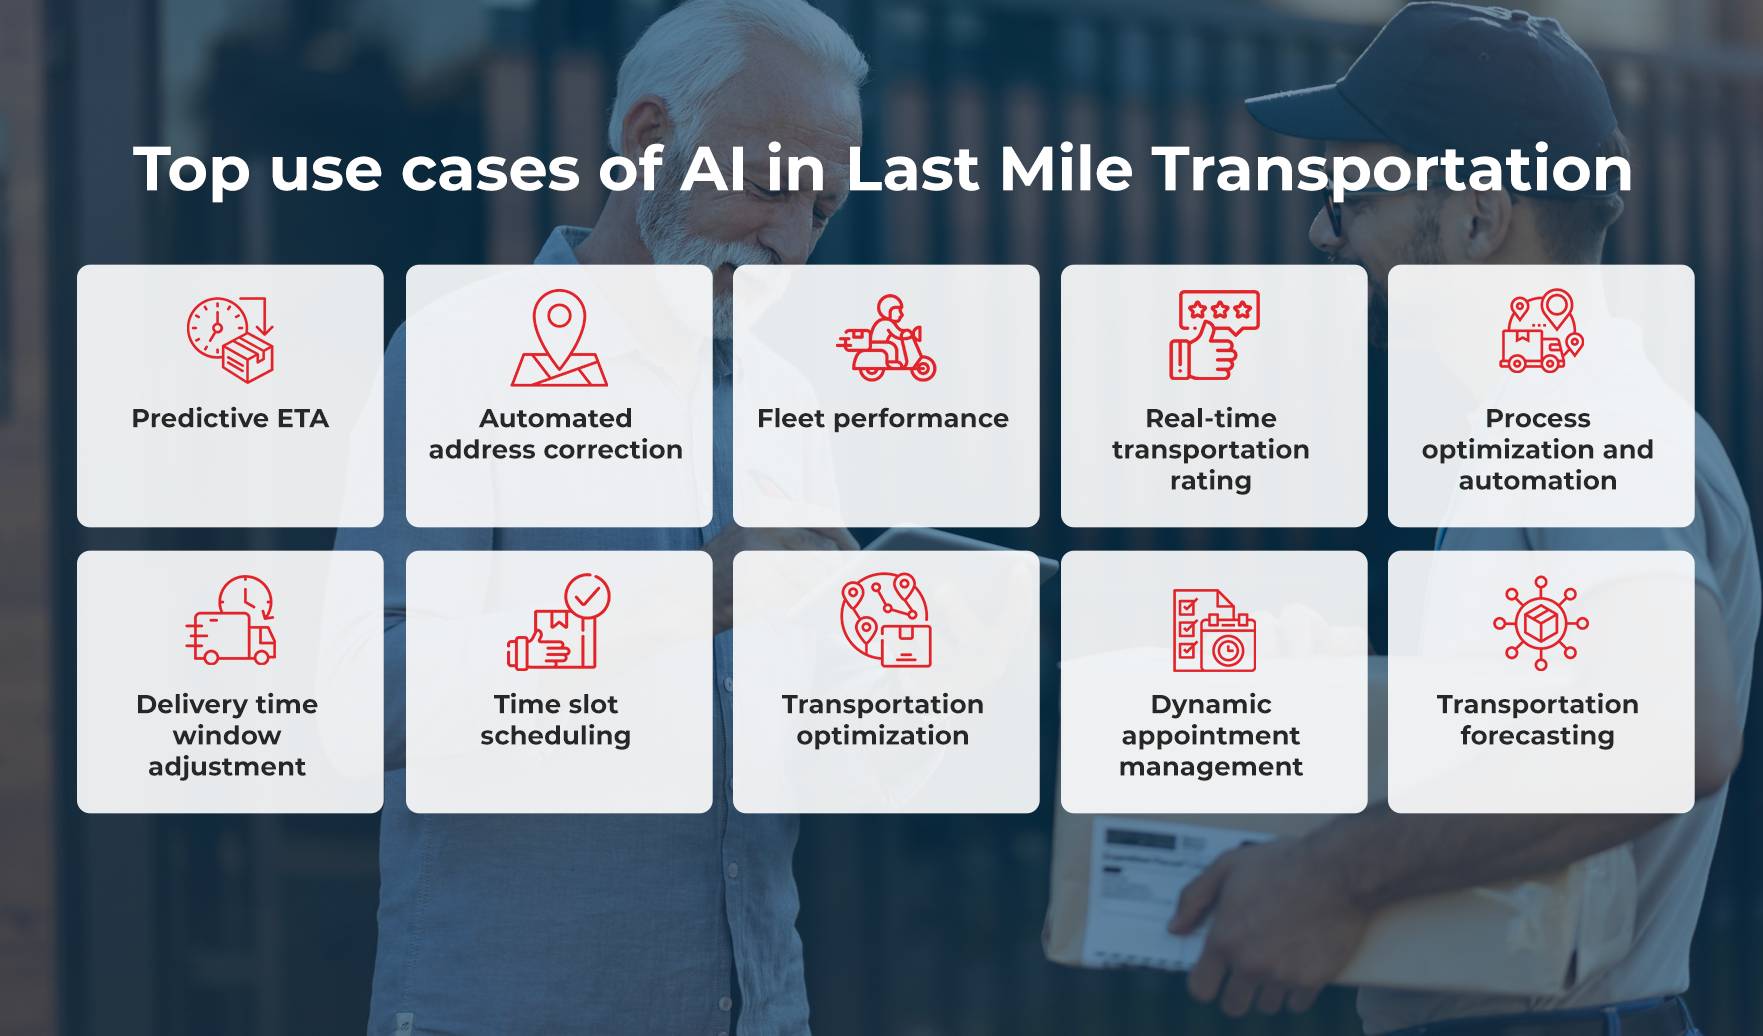 Top use cases of AI in Last Mile Transportation